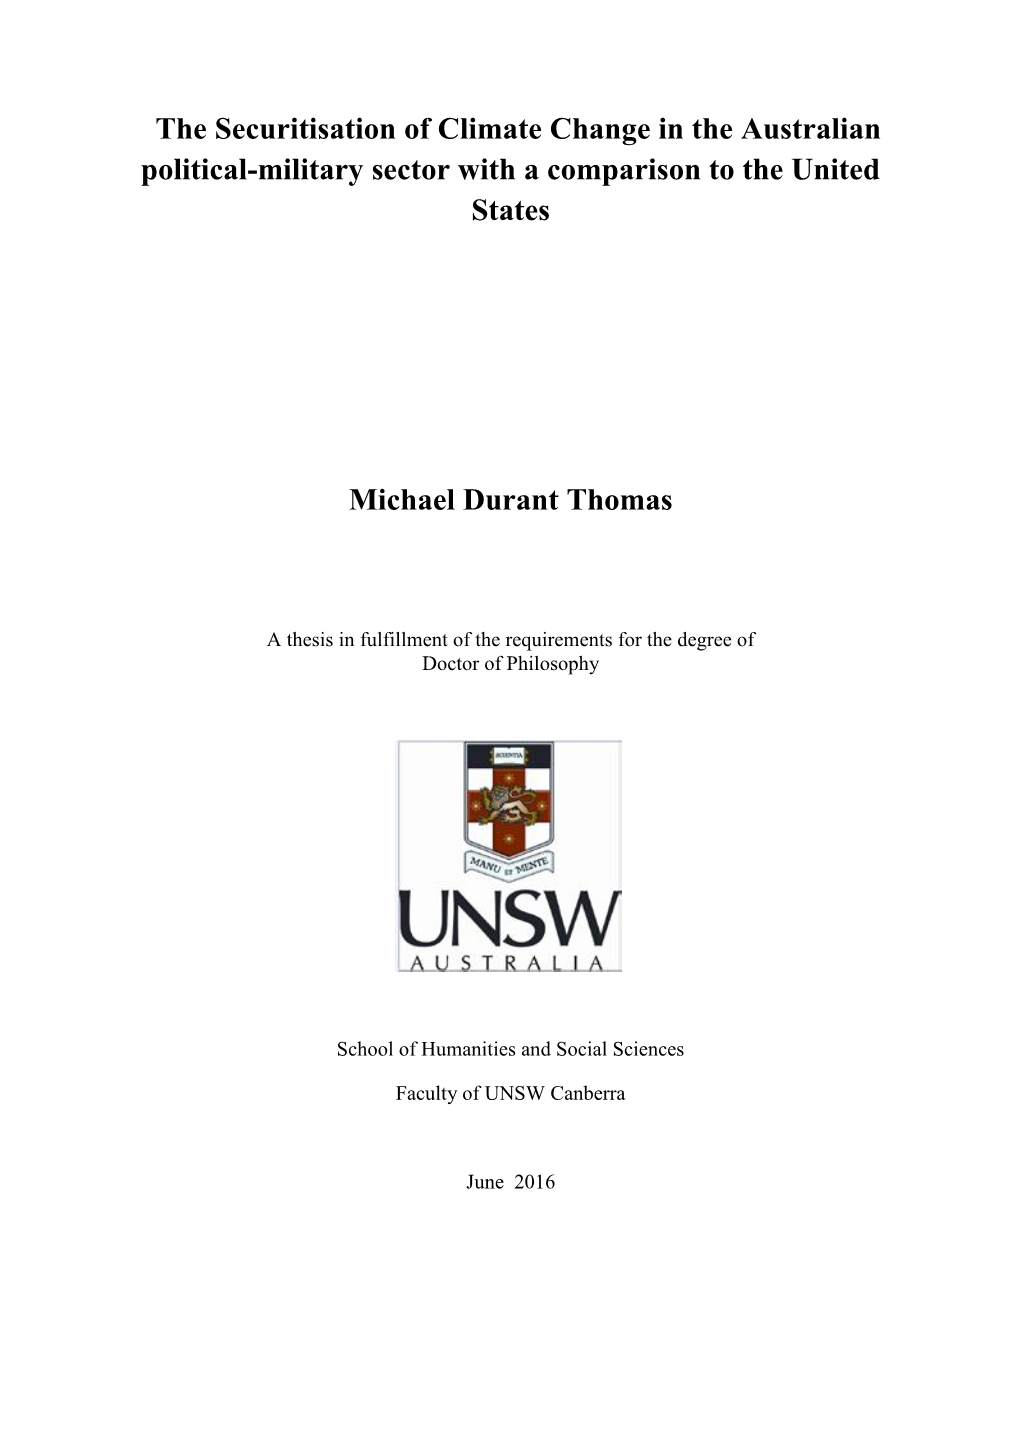 The Securitisation of Climate Change in the Australian Political-Military Sector with a Comparison to the United States Michael Durant Thomas